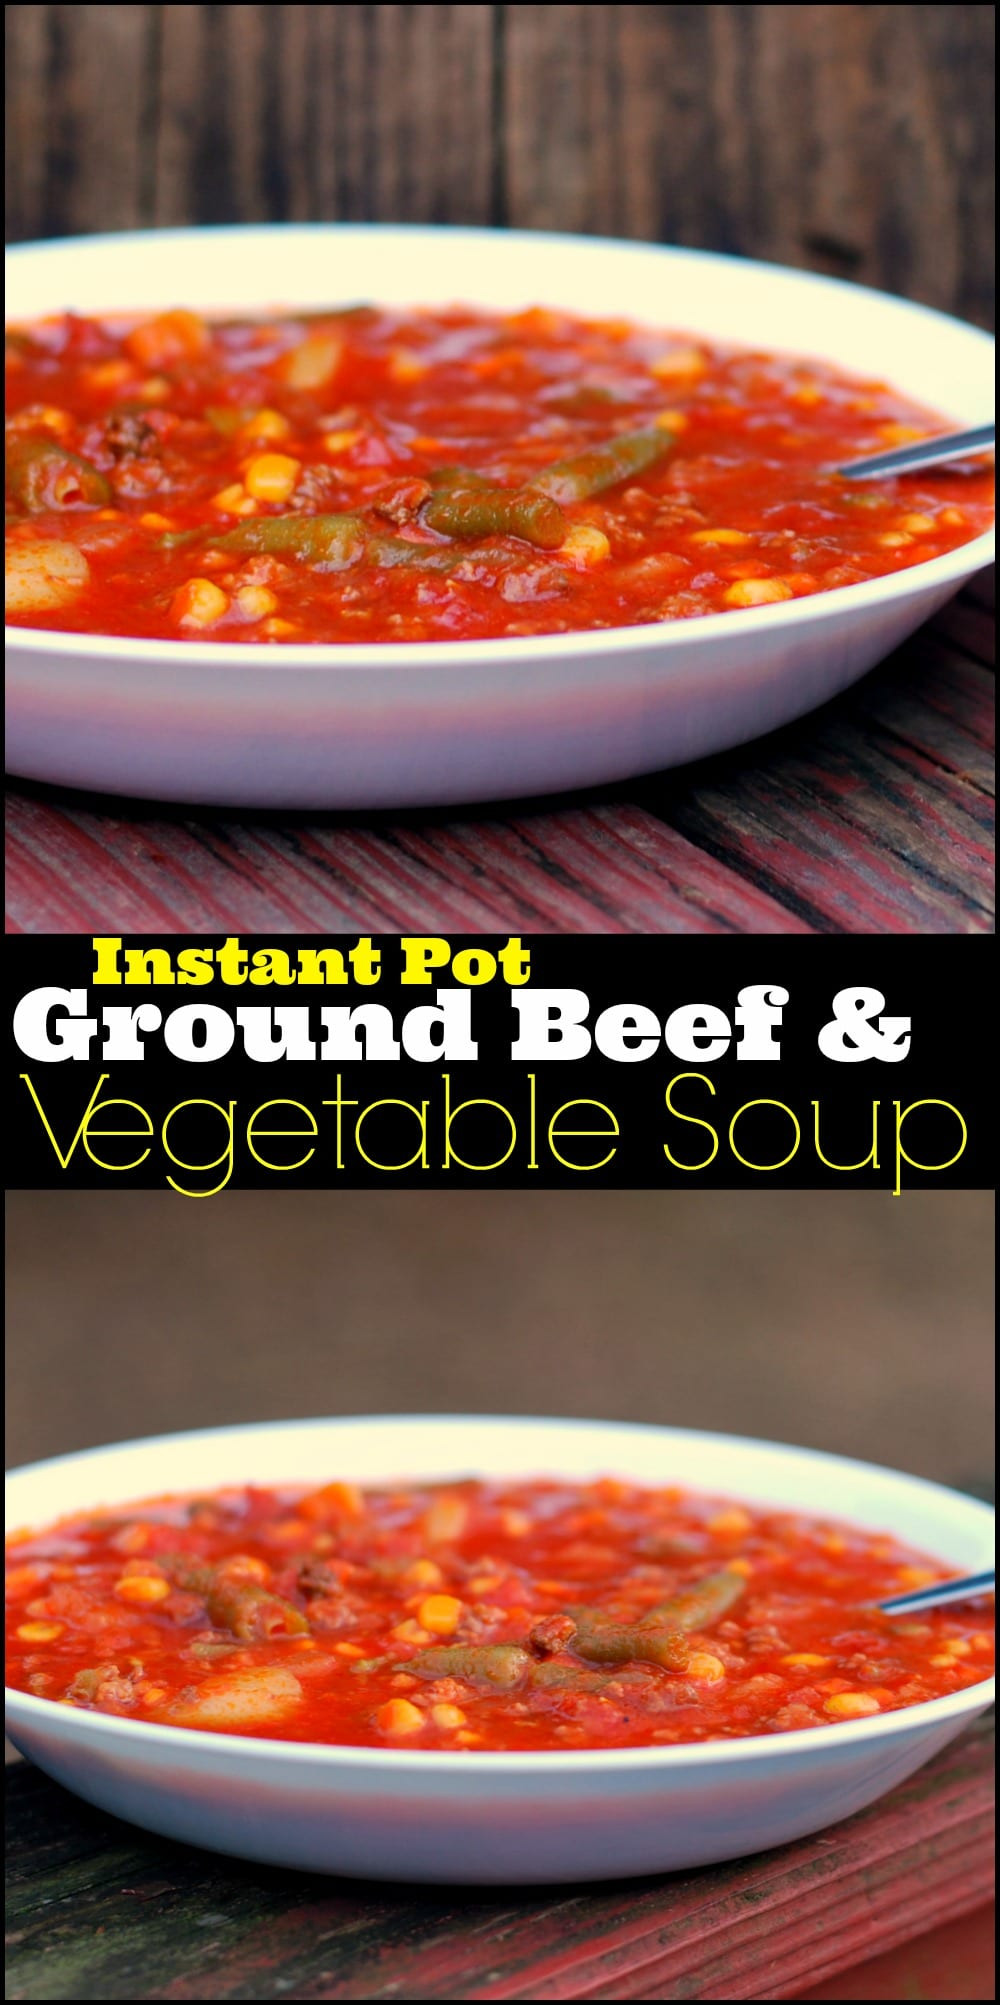 Ground Beef Vegetable Soup
 Instant Pot Ground Beef & Ve able Soup Aunt Bee s Recipes